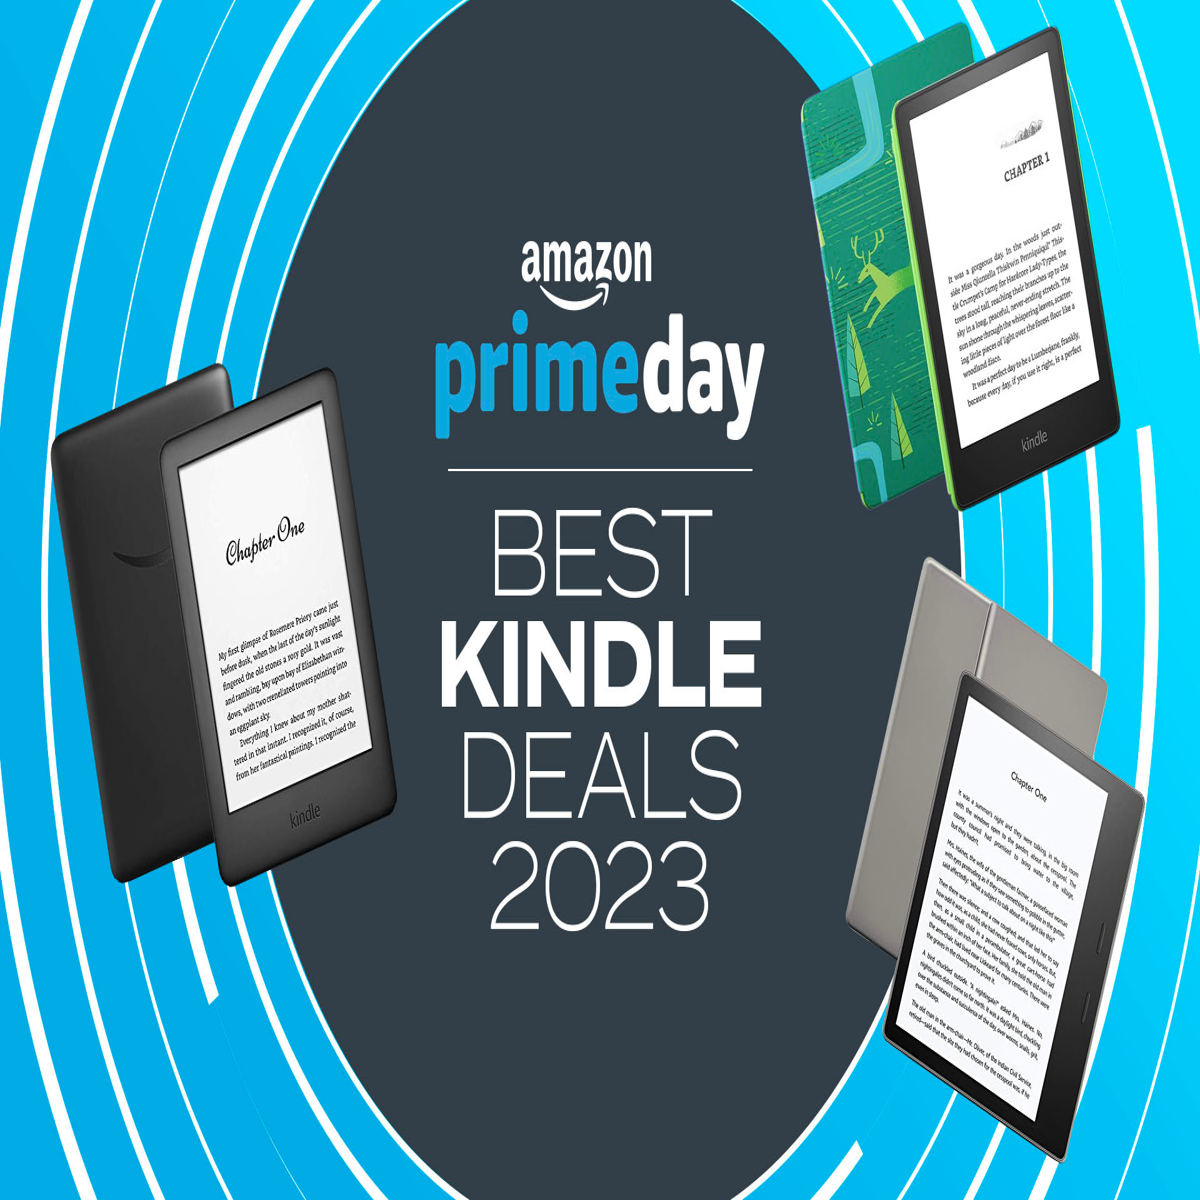 Prime Day Kindle deals 2023: no more offers on Kindles